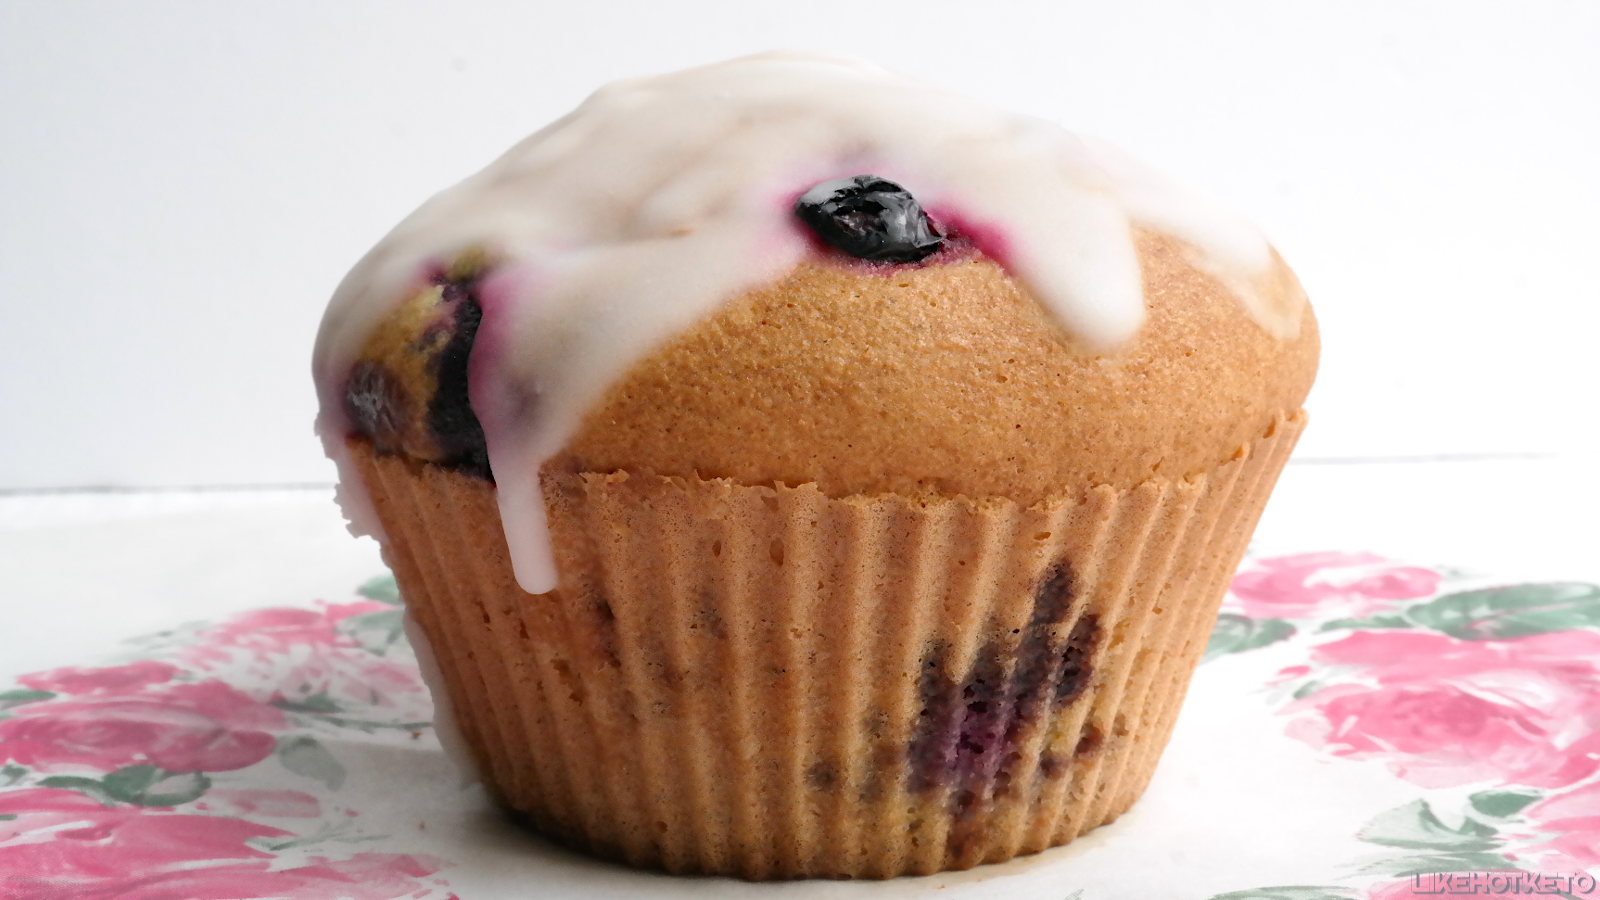 A large blueberry muffin covered in sugar-free lemon glaze.